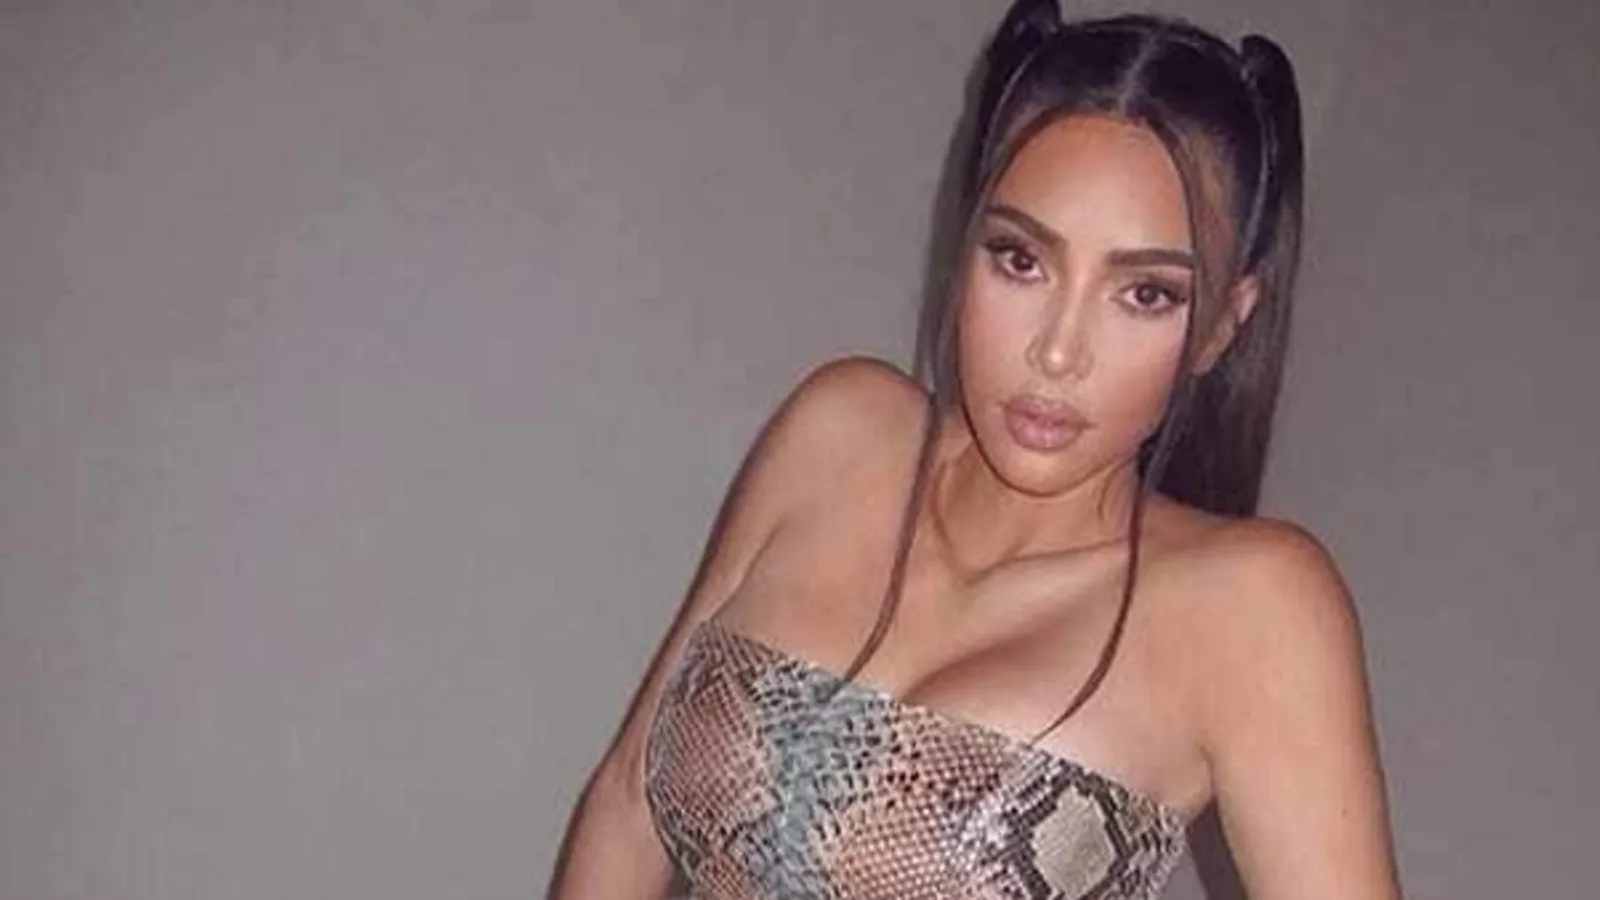 Twitter users calls out Kim Kardashian for advising women to ‘get off your a** and work’: ‘This is joke of the year’